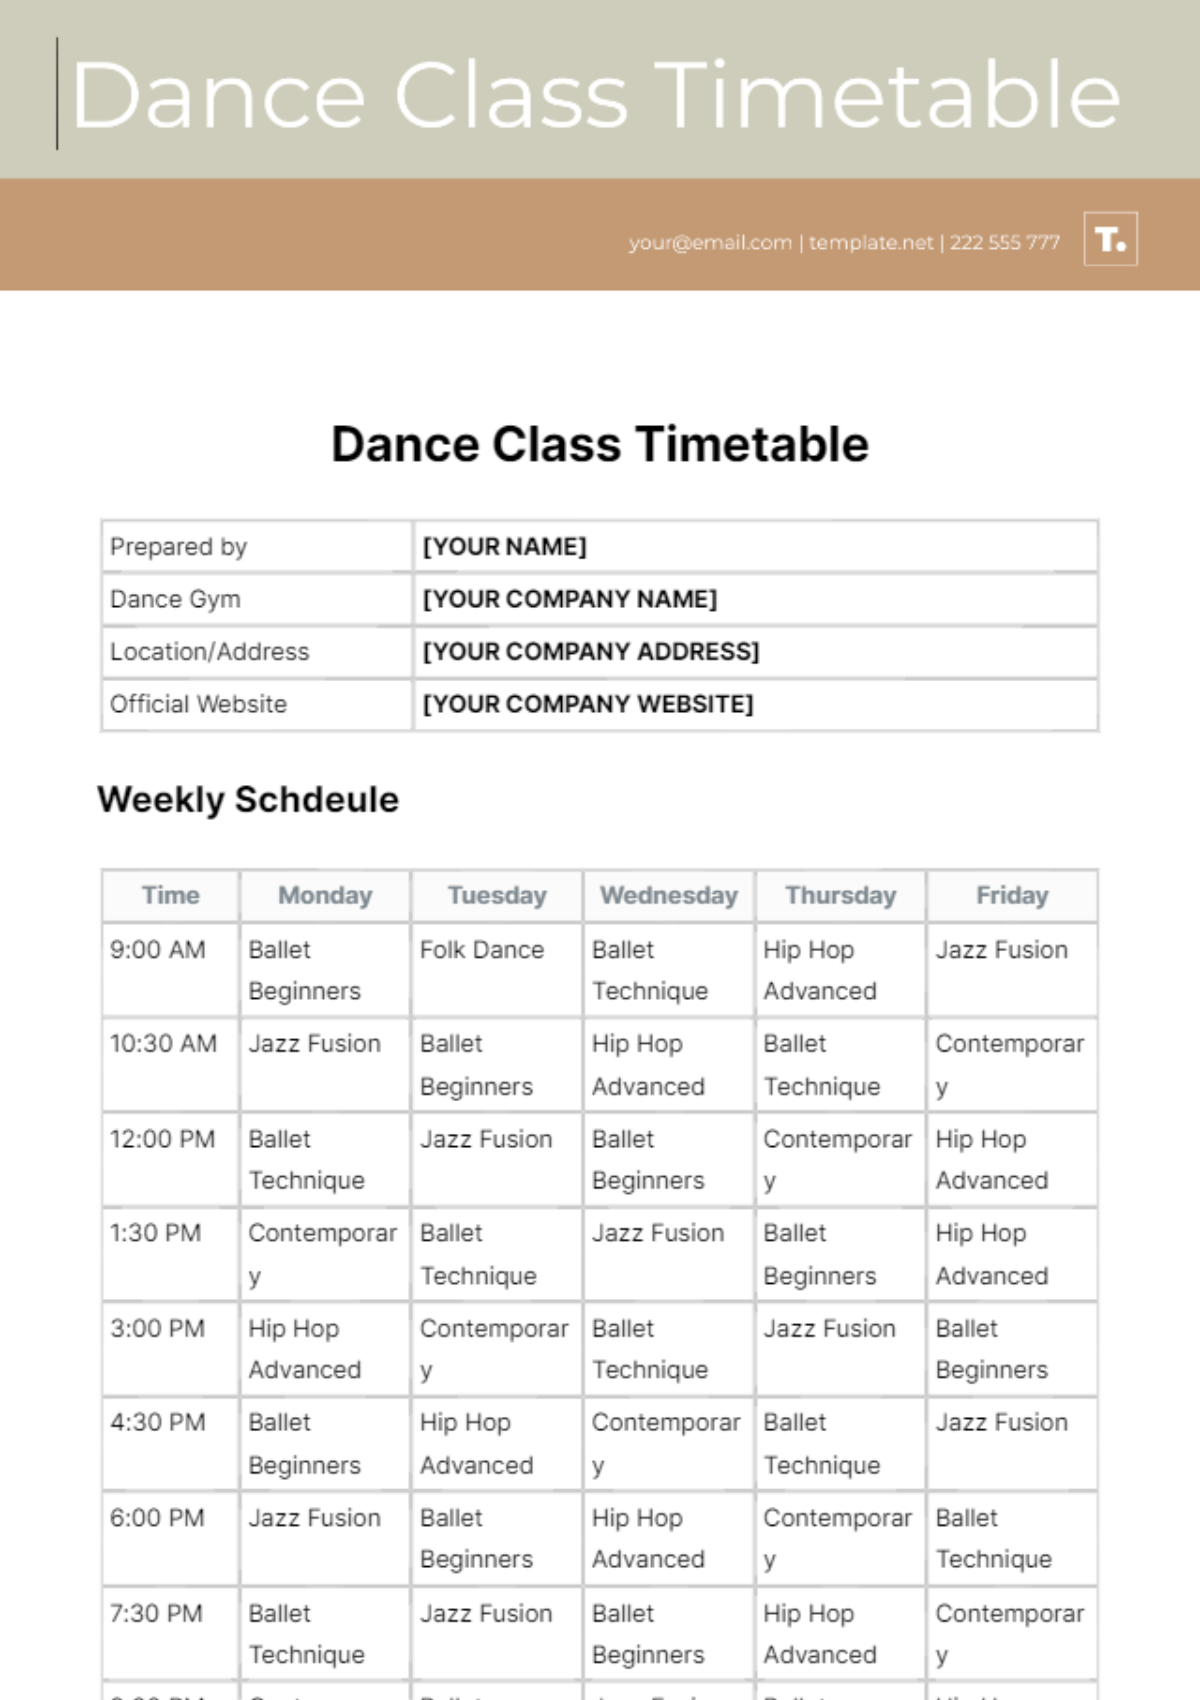 Free Dance Class Timetable Template